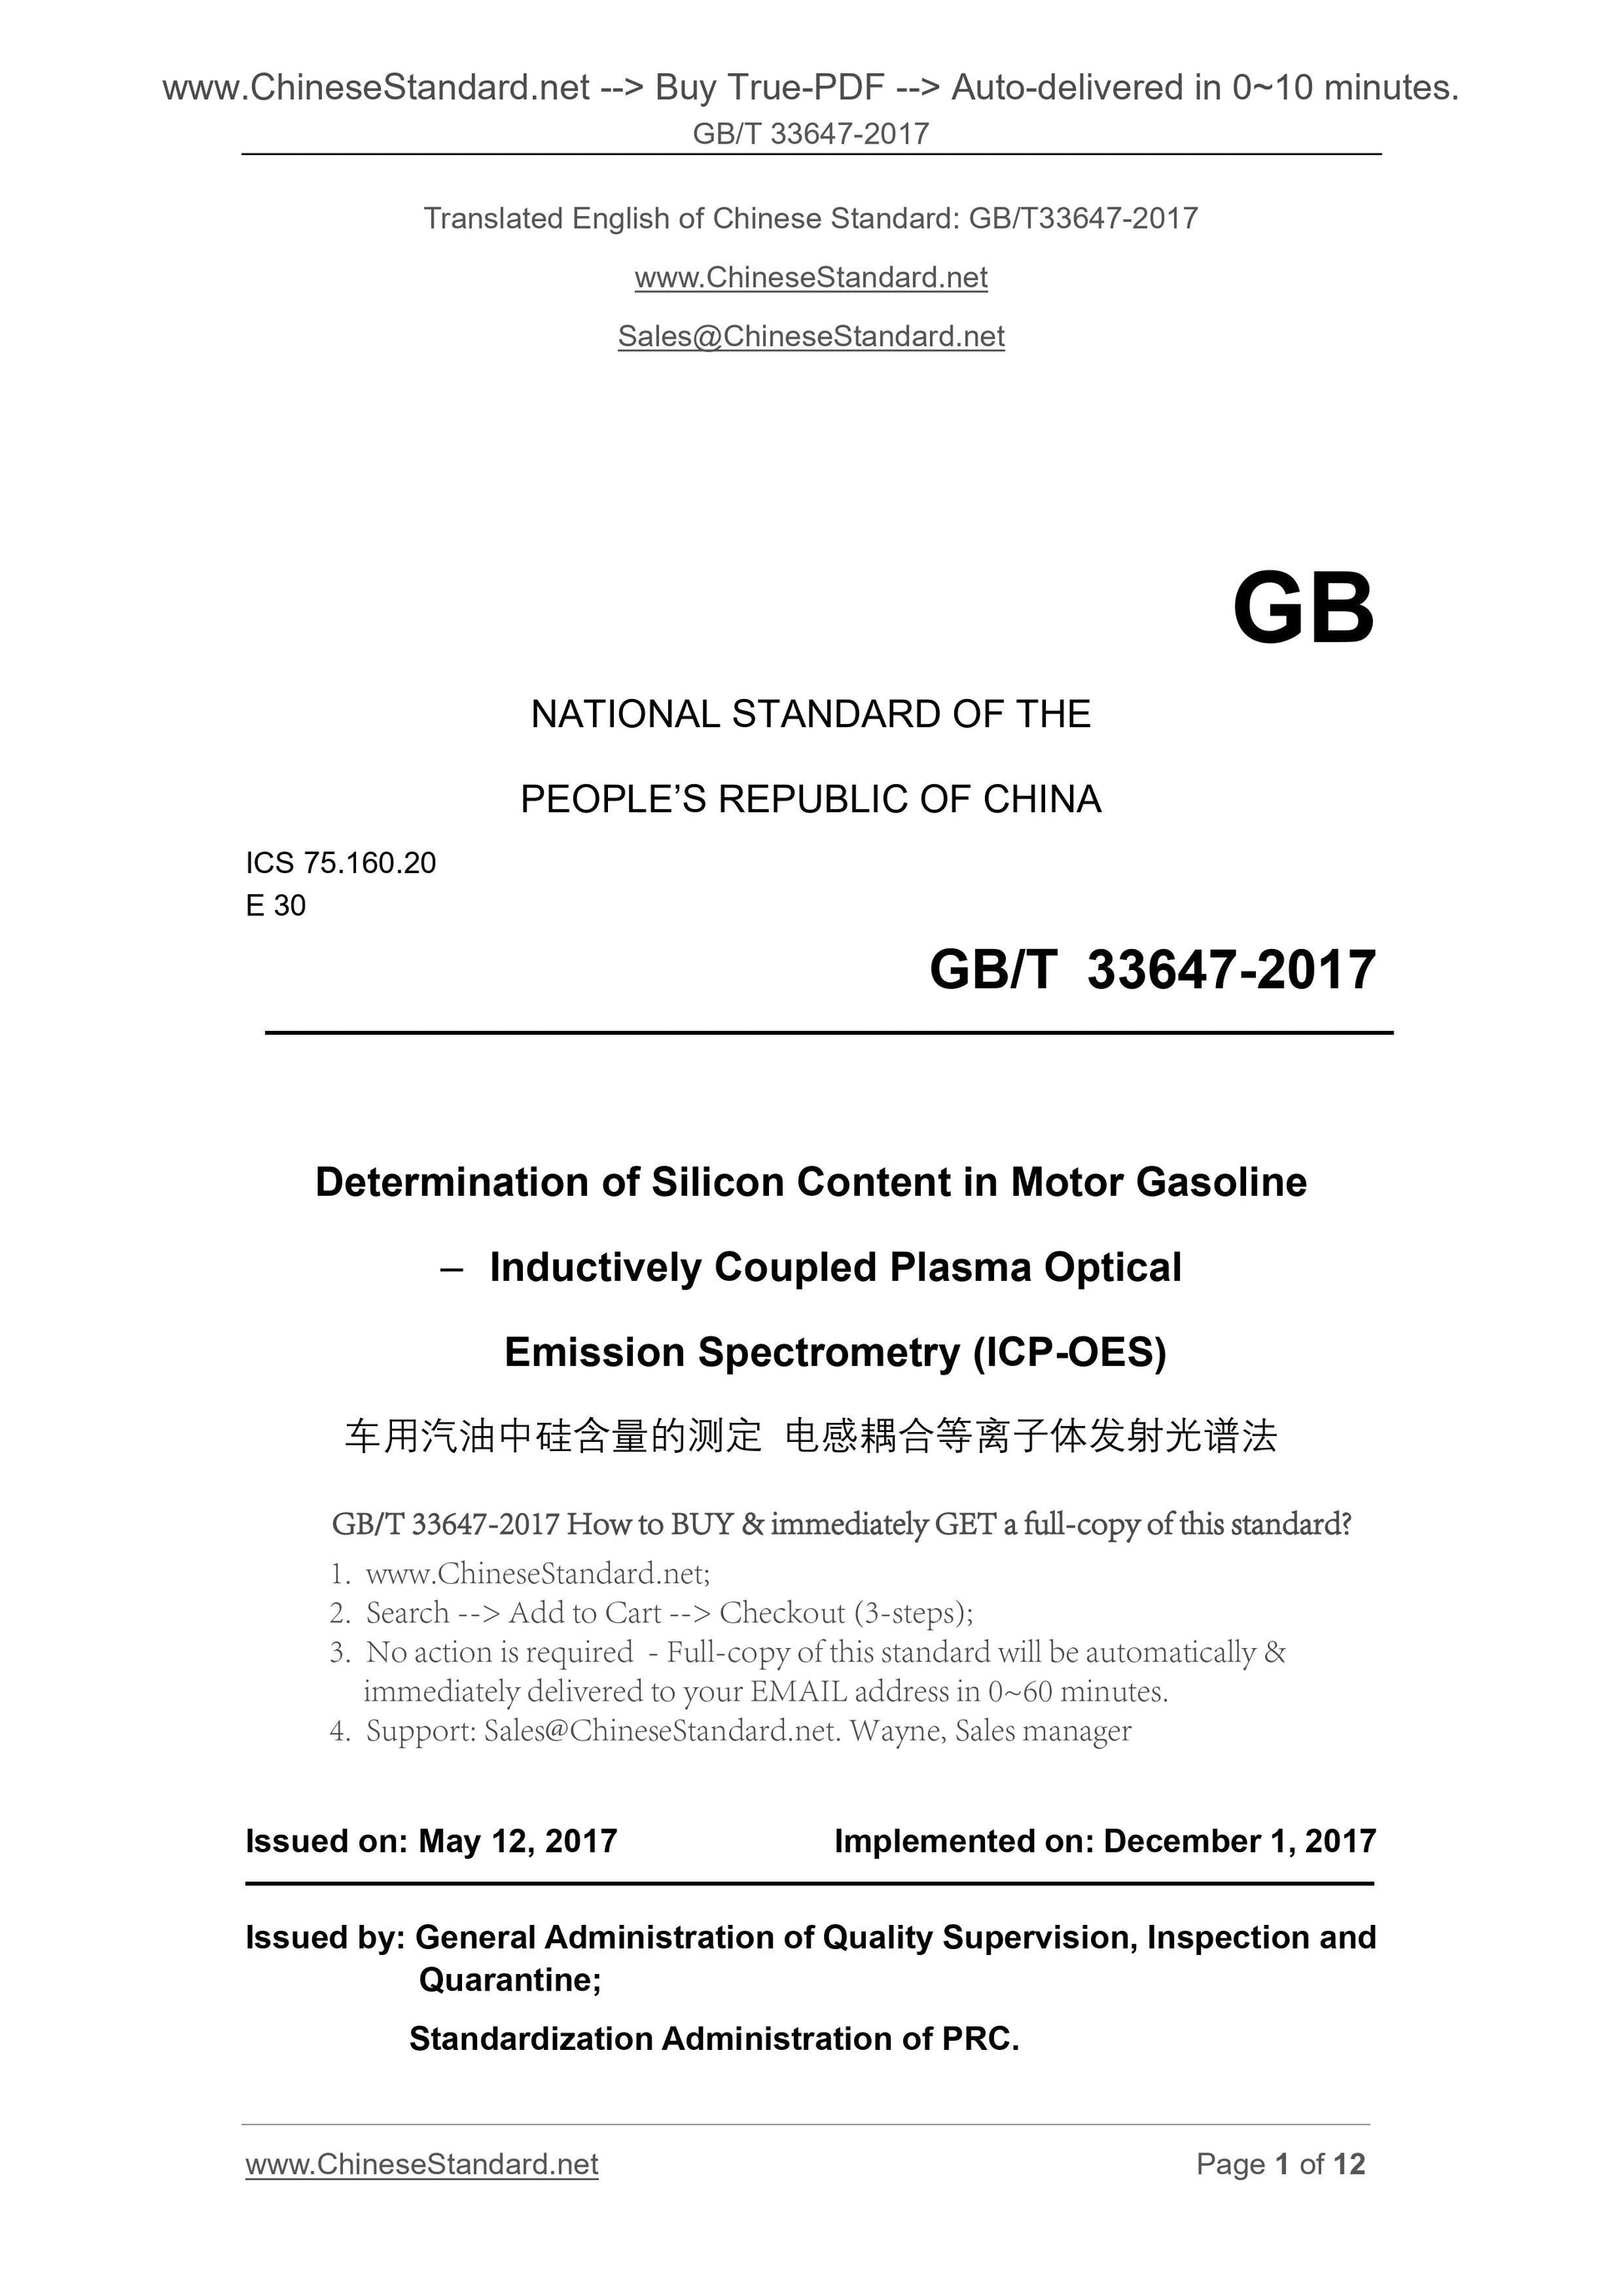 GB/T 33647-2017 Page 1